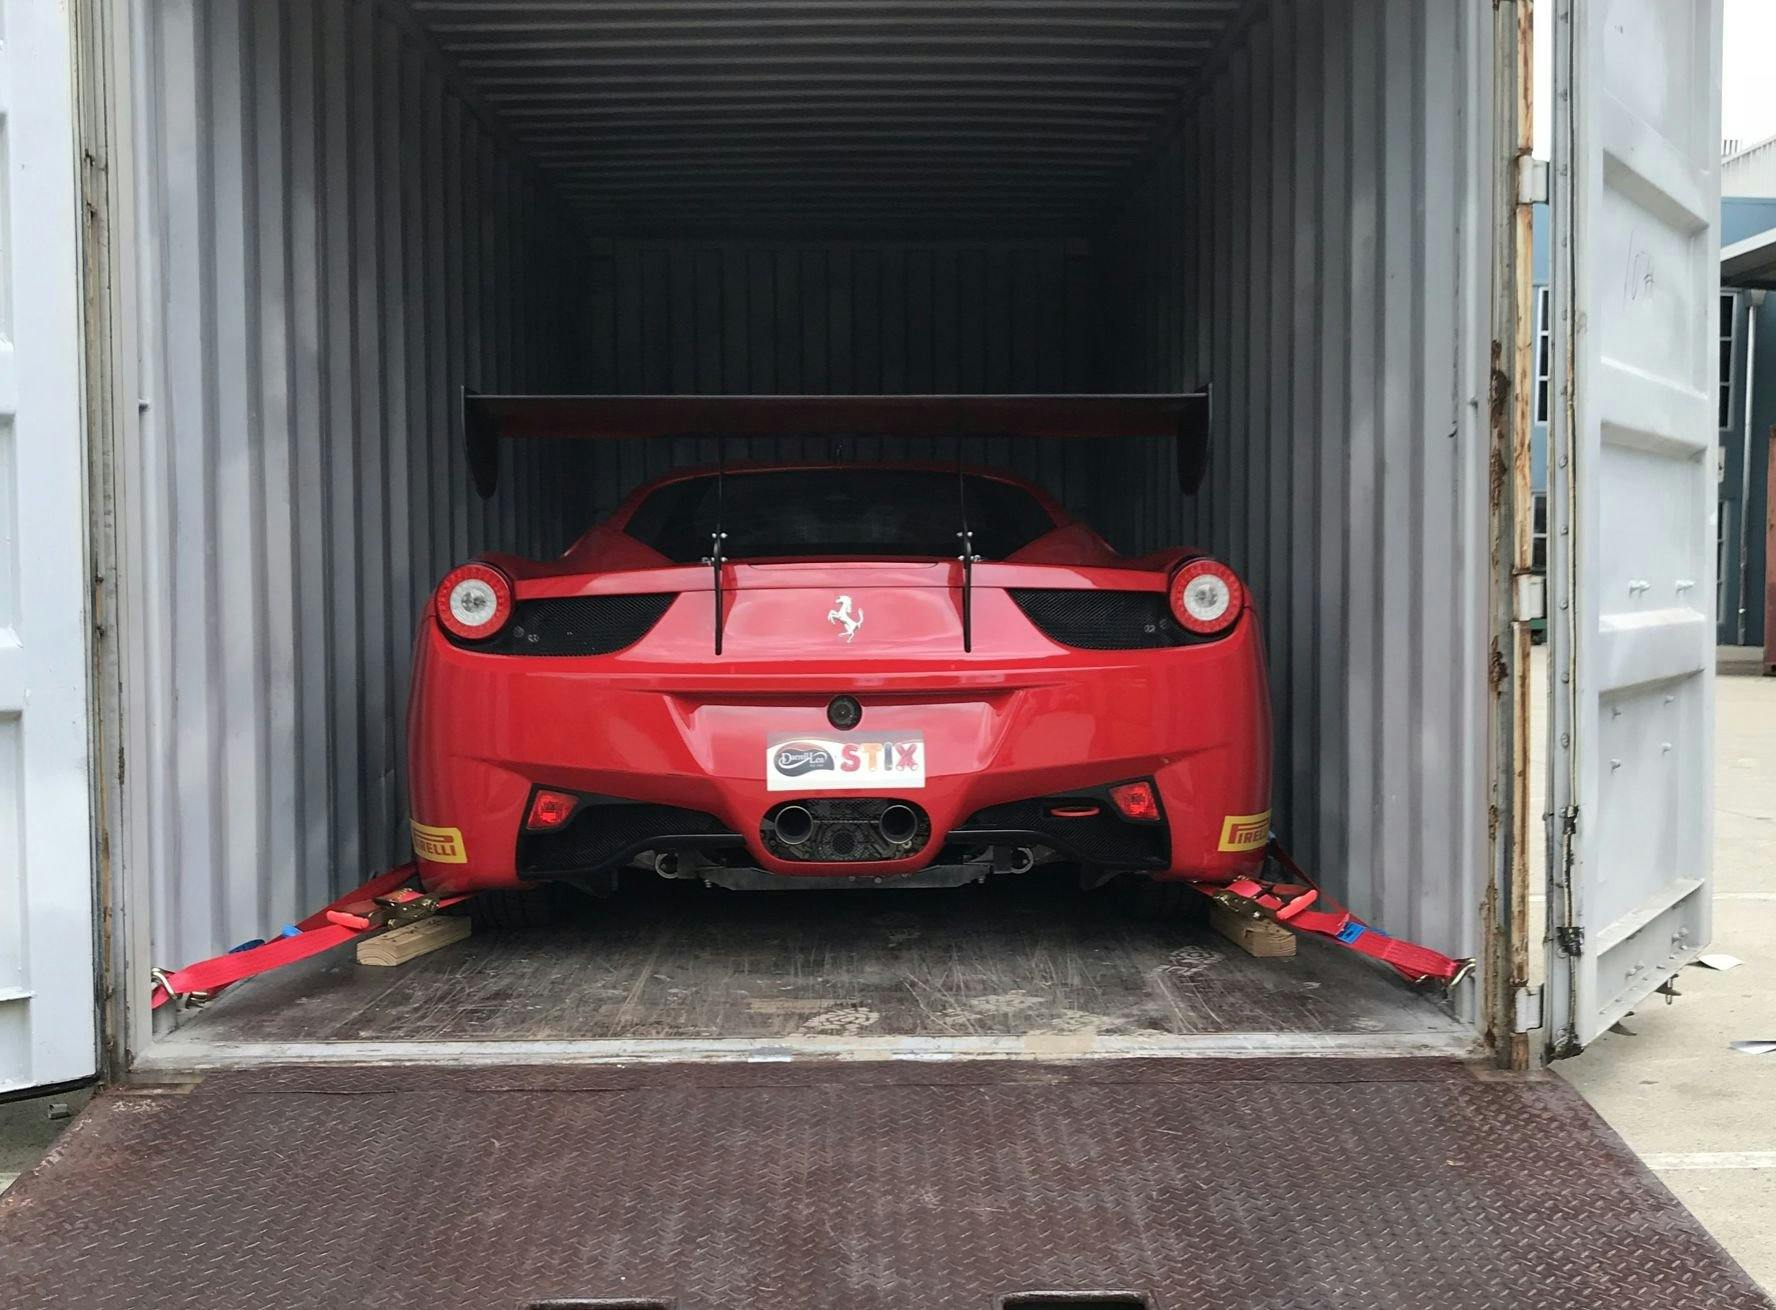 Car in container